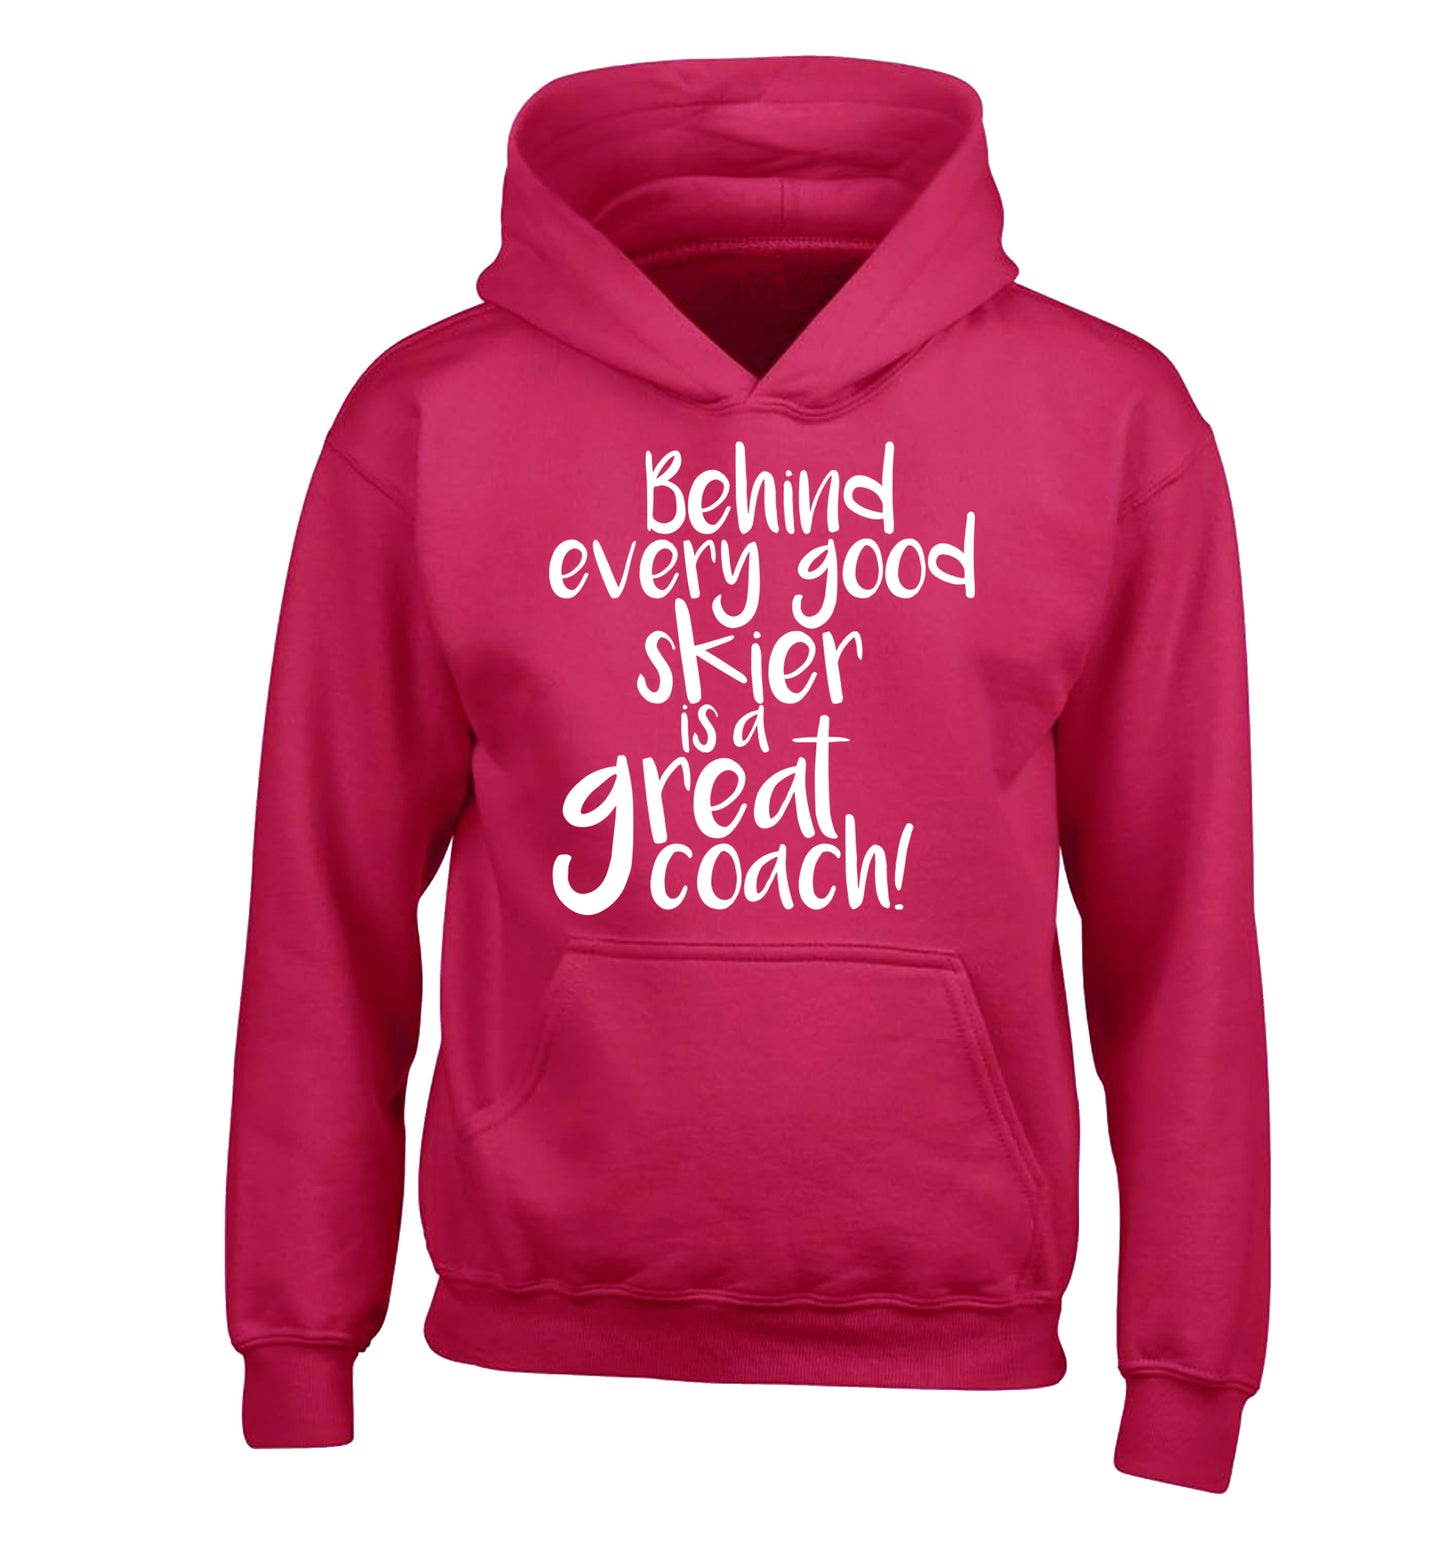 Behind every good skier is a great coach! children's pink hoodie 12-14 Years